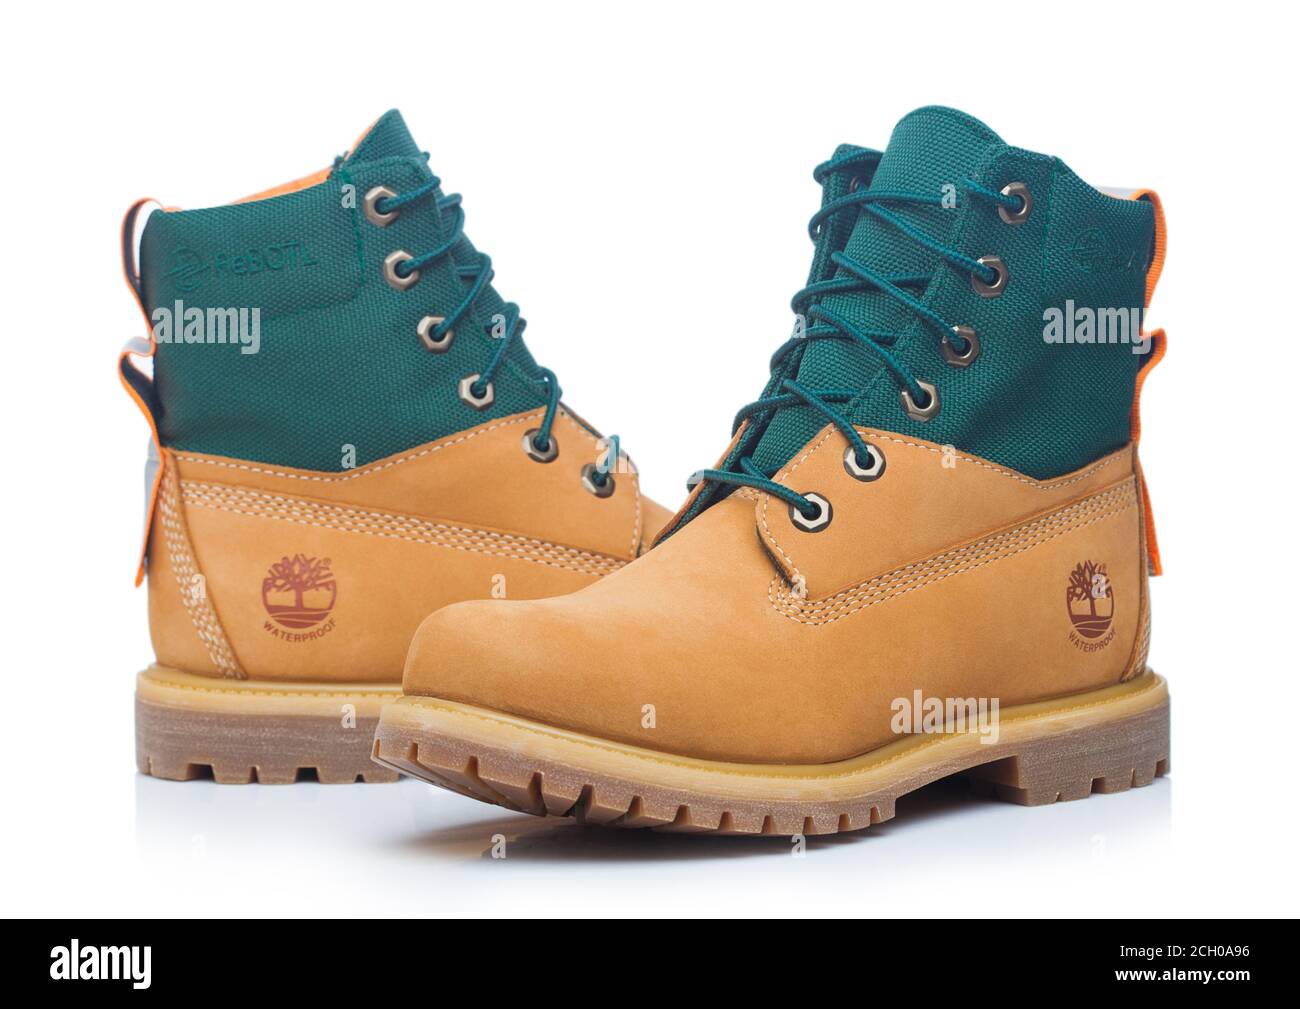 LONDON, UK - SEPTEMBER 09, 2020: Timberland 6 inch rebotl fabric and  leather boots for women in yellow on white background Stock Photo - Alamy